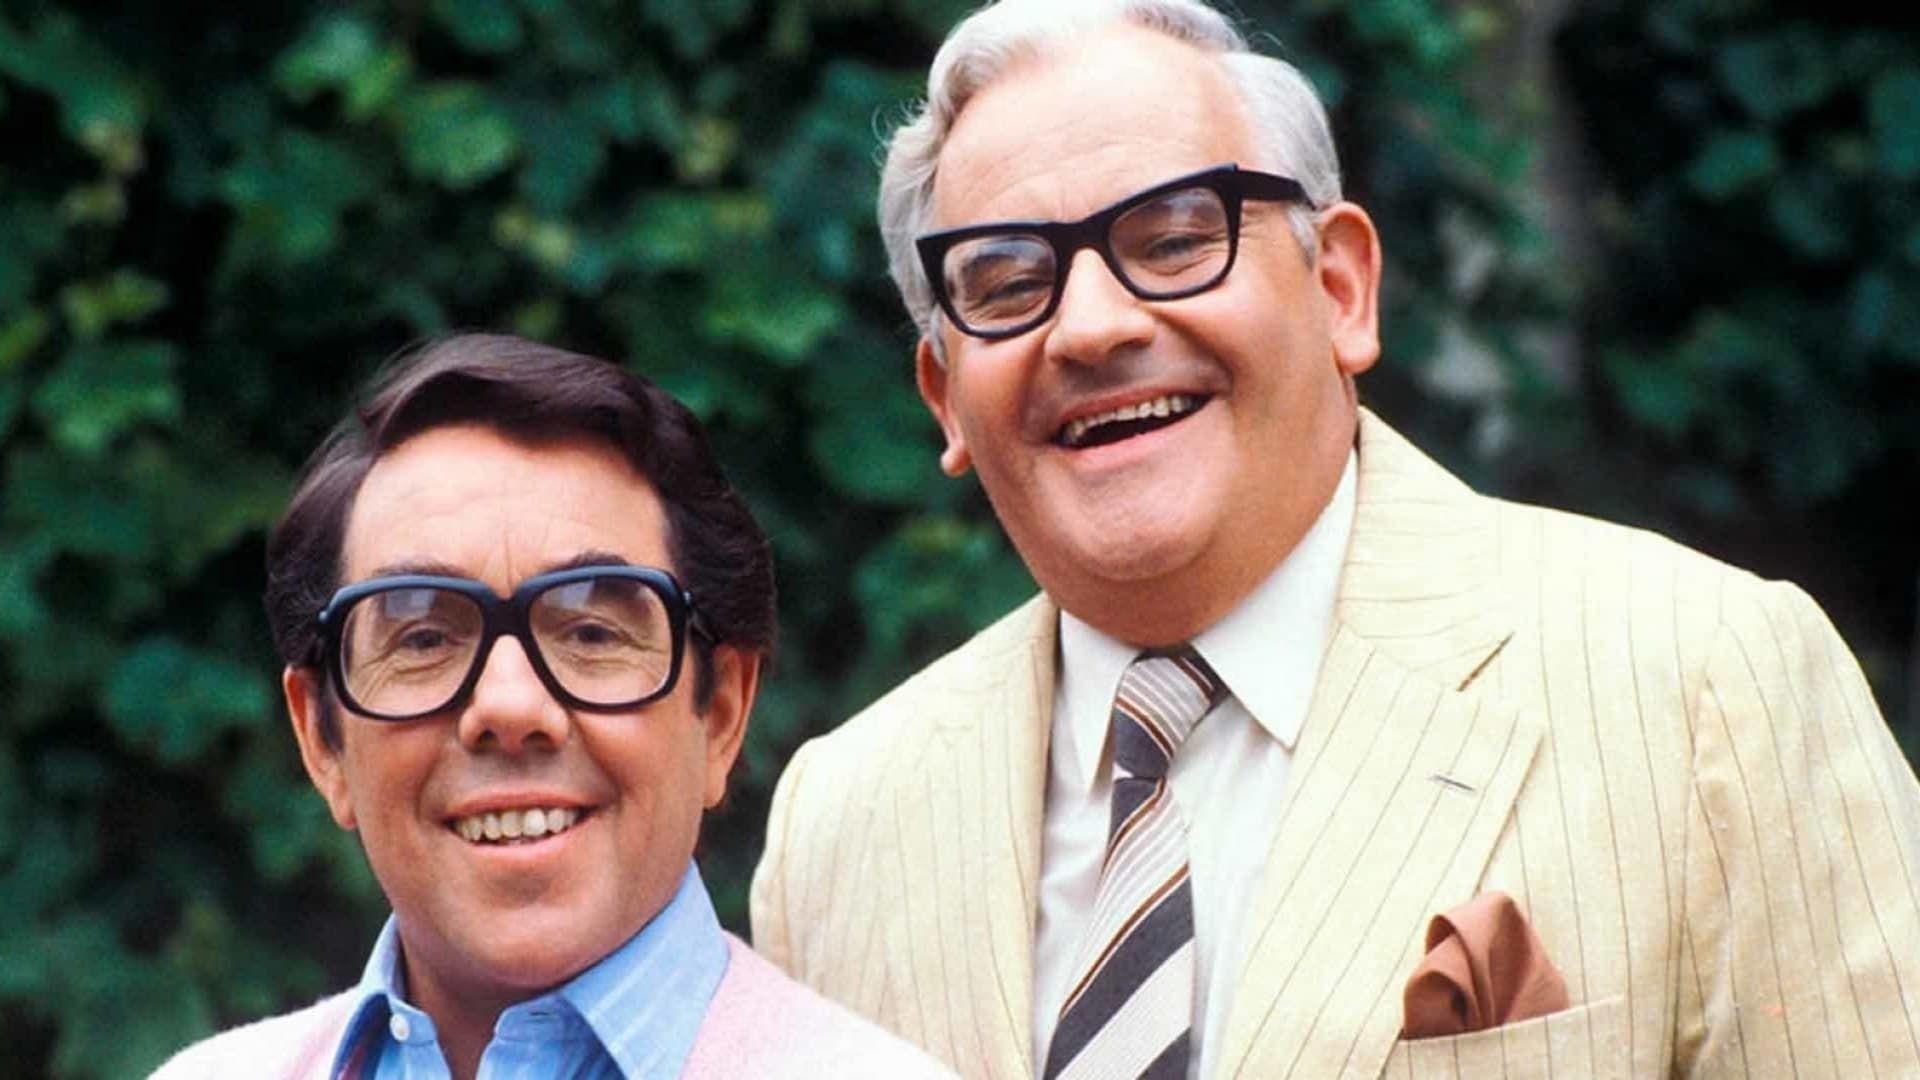 The Two Ronnies background